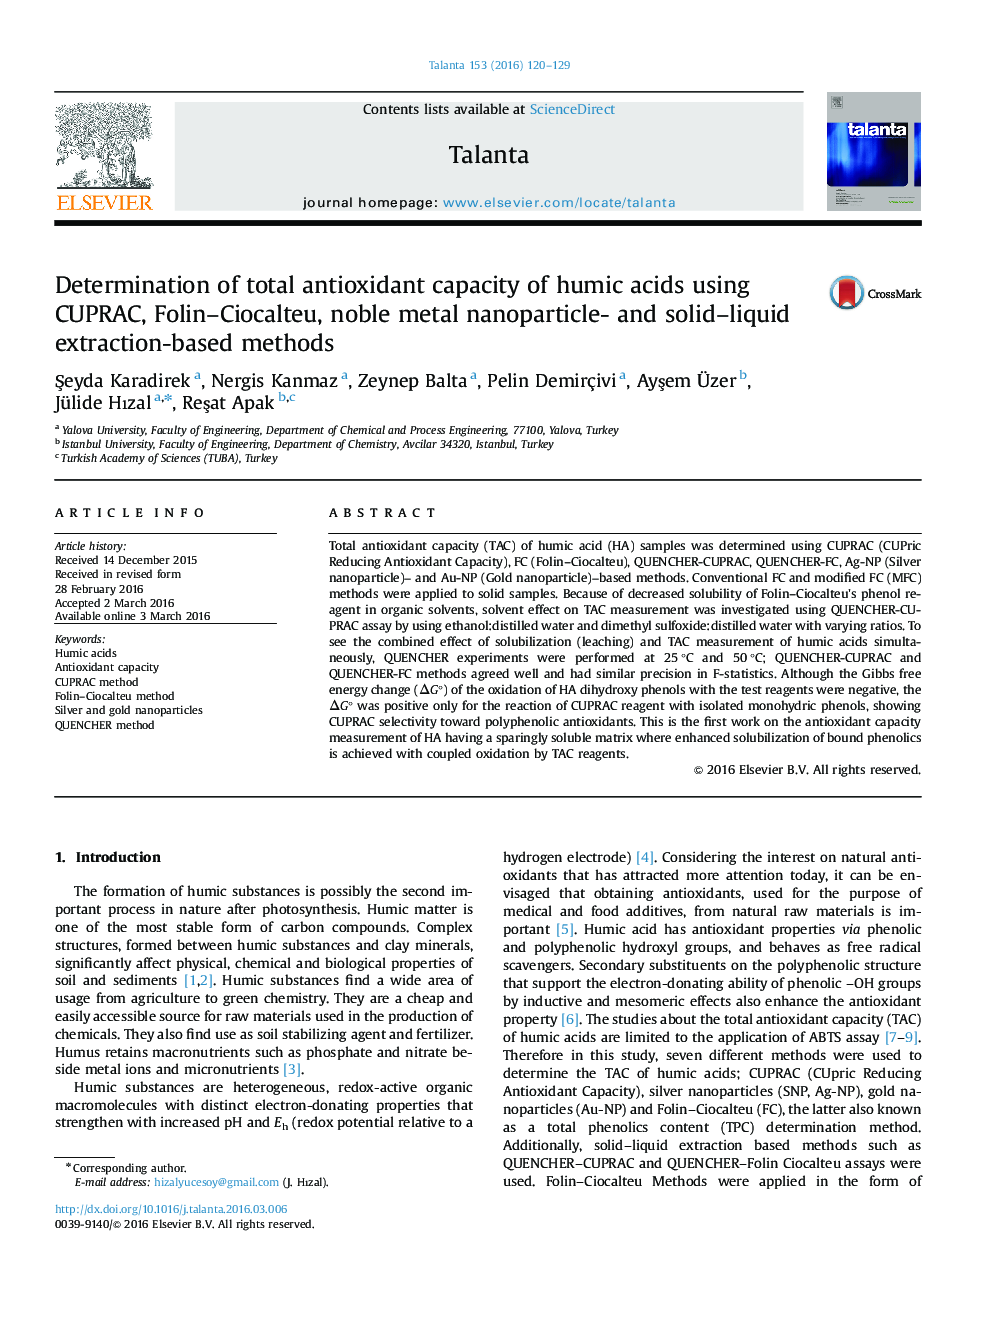 Determination of total antioxidant capacity of humic acids using CUPRAC, Folin–Ciocalteu, noble metal nanoparticle- and solid–liquid extraction-based methods